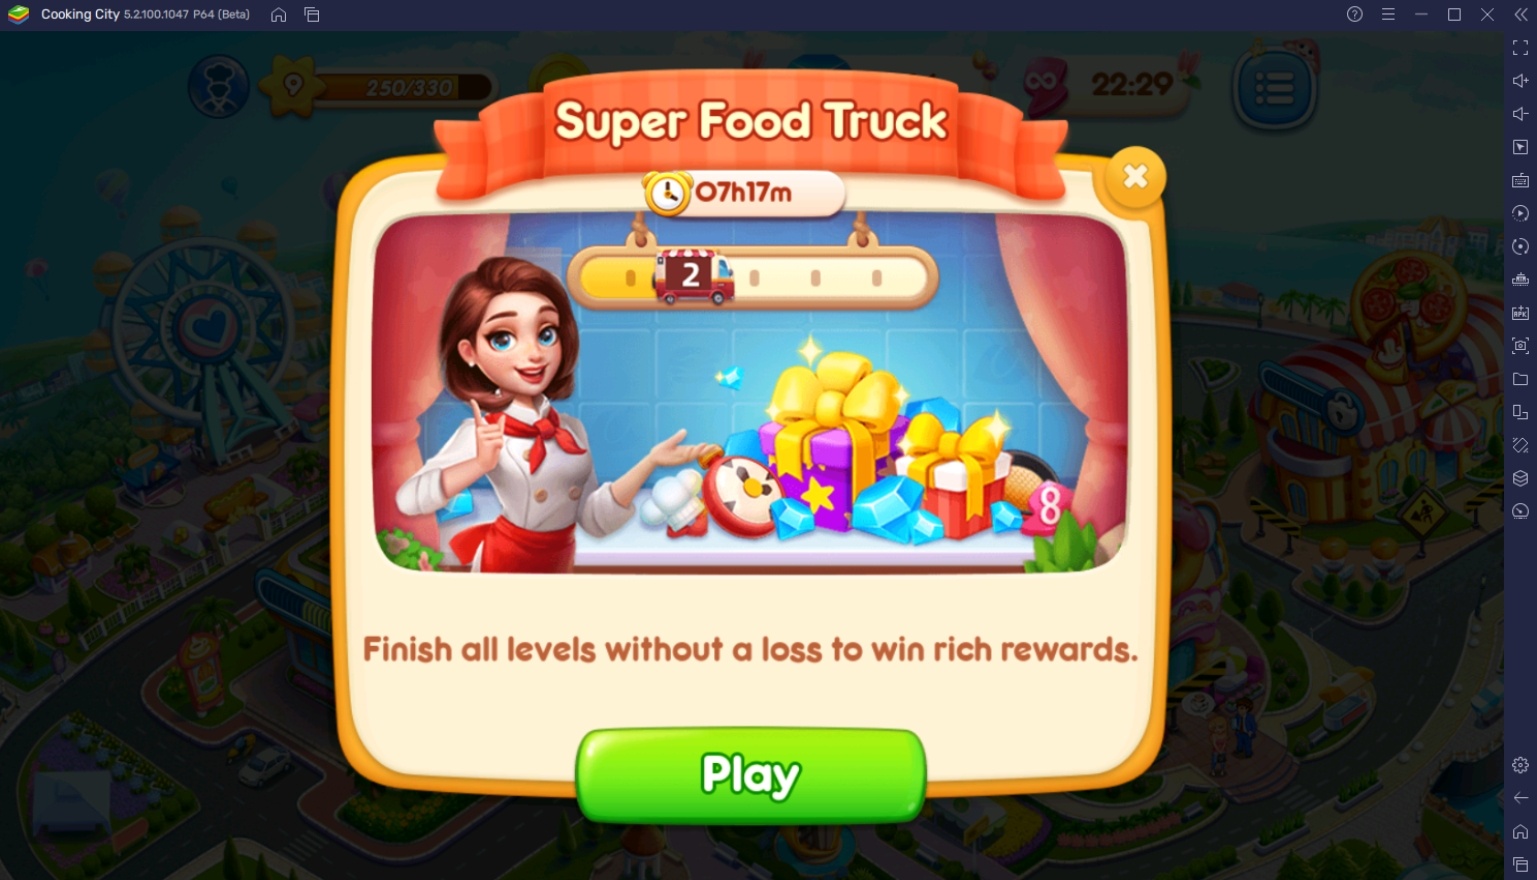 BlueStacks' Beginners Guide to Playing Cooking City: Restaurant Games